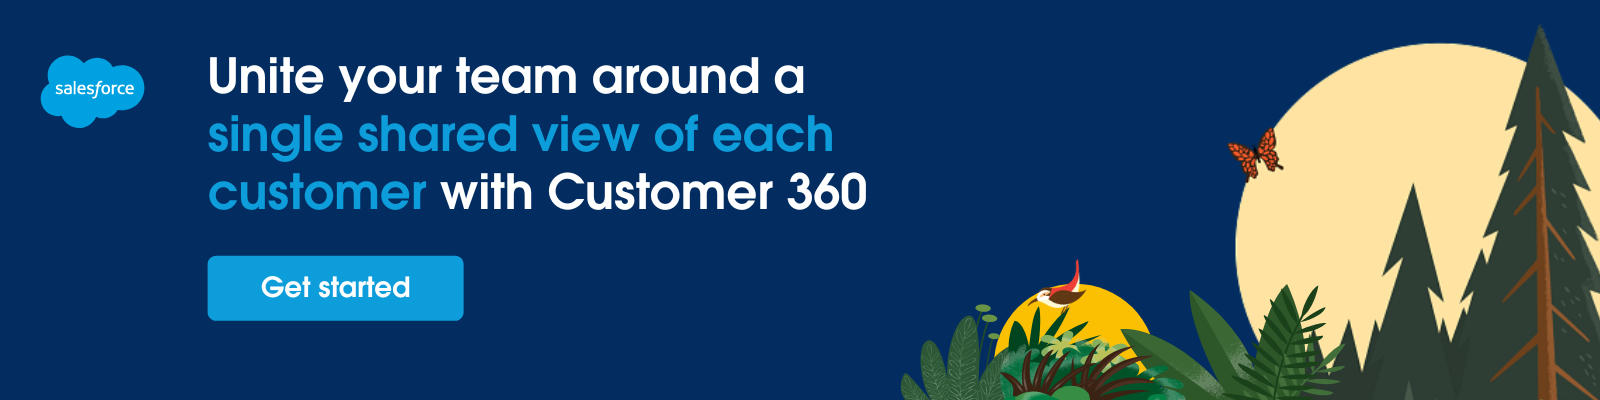 Unite your team around a single shared view of each customer with Customer 360.